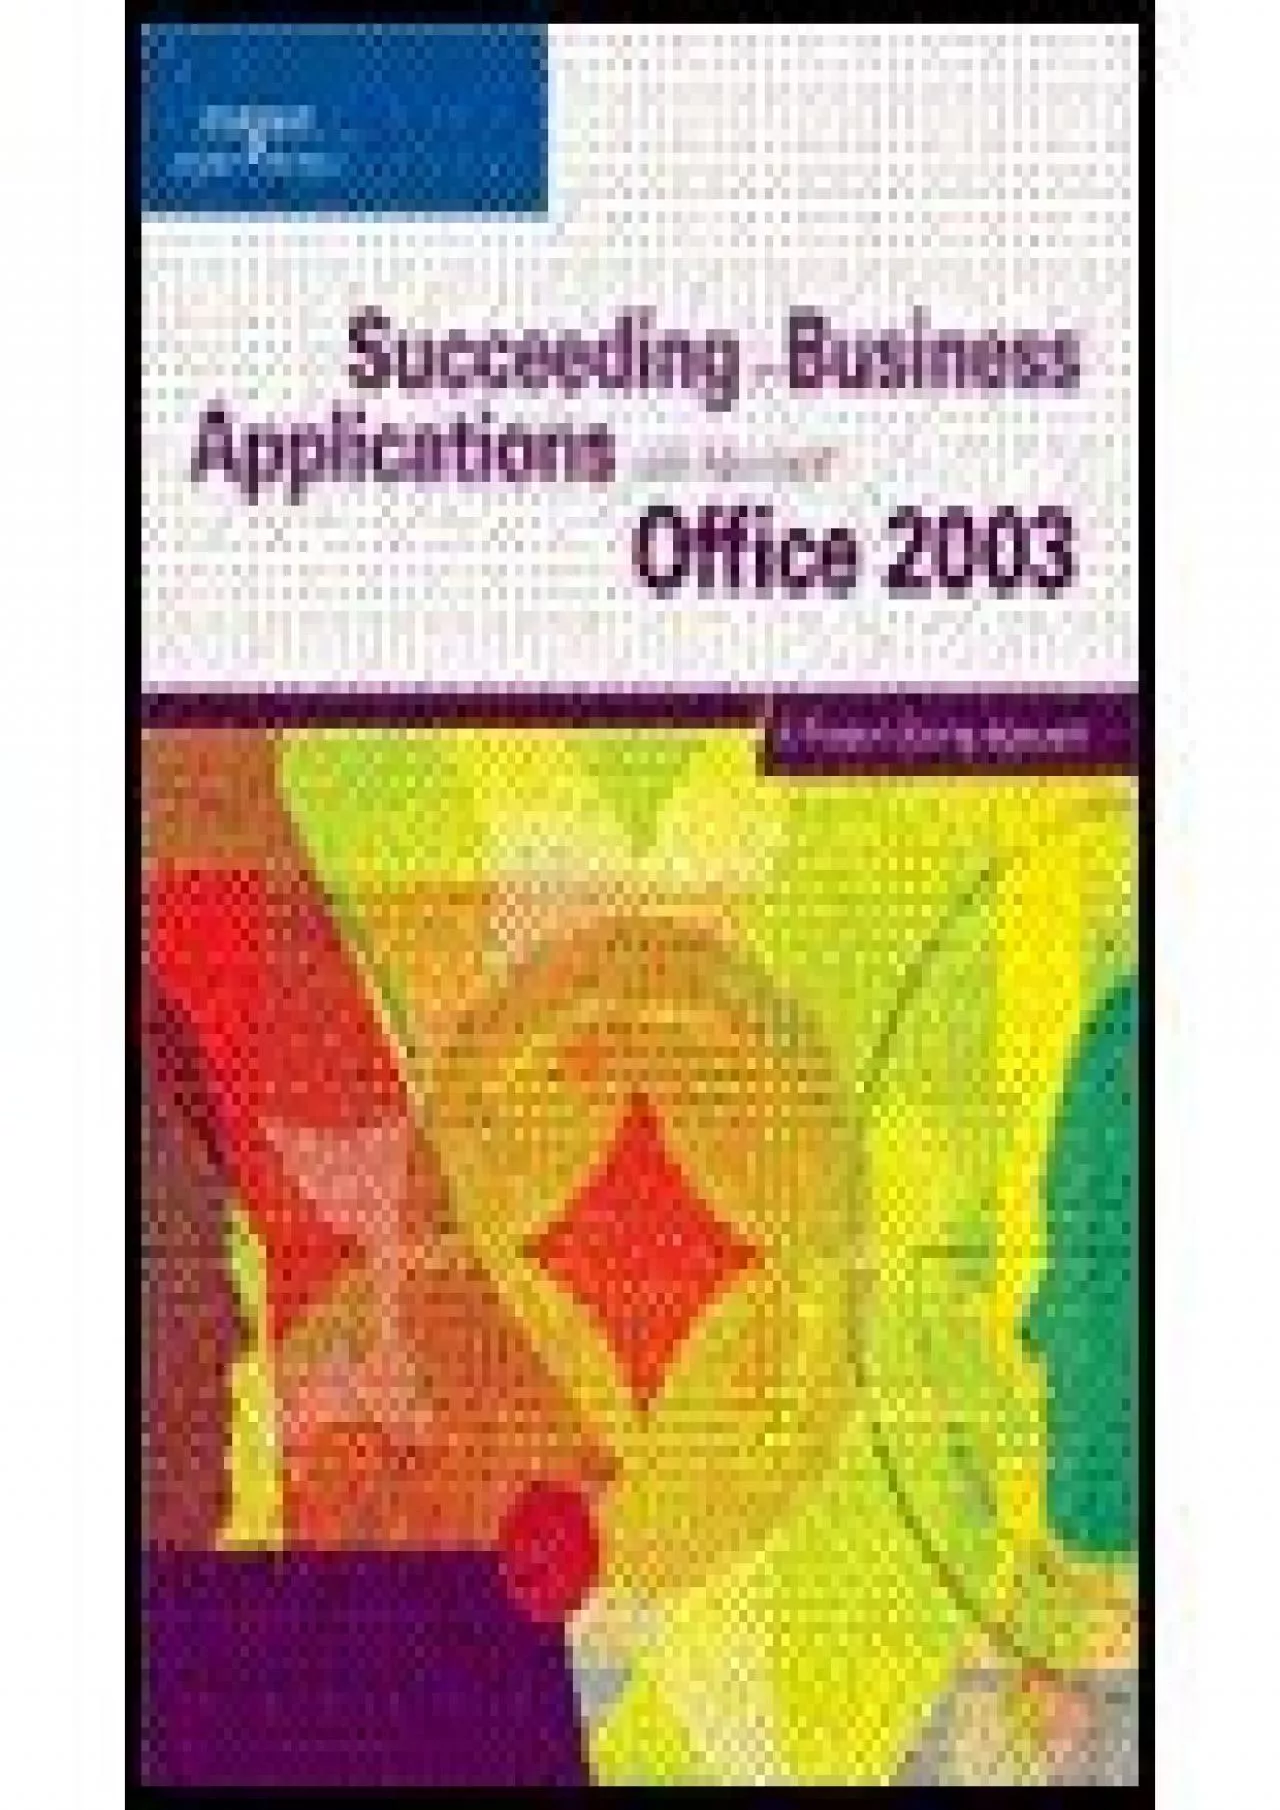 (BOOS)-Succeeding in Business With Microsoft Office 2003 (06) by Bast, Karin - Gross,